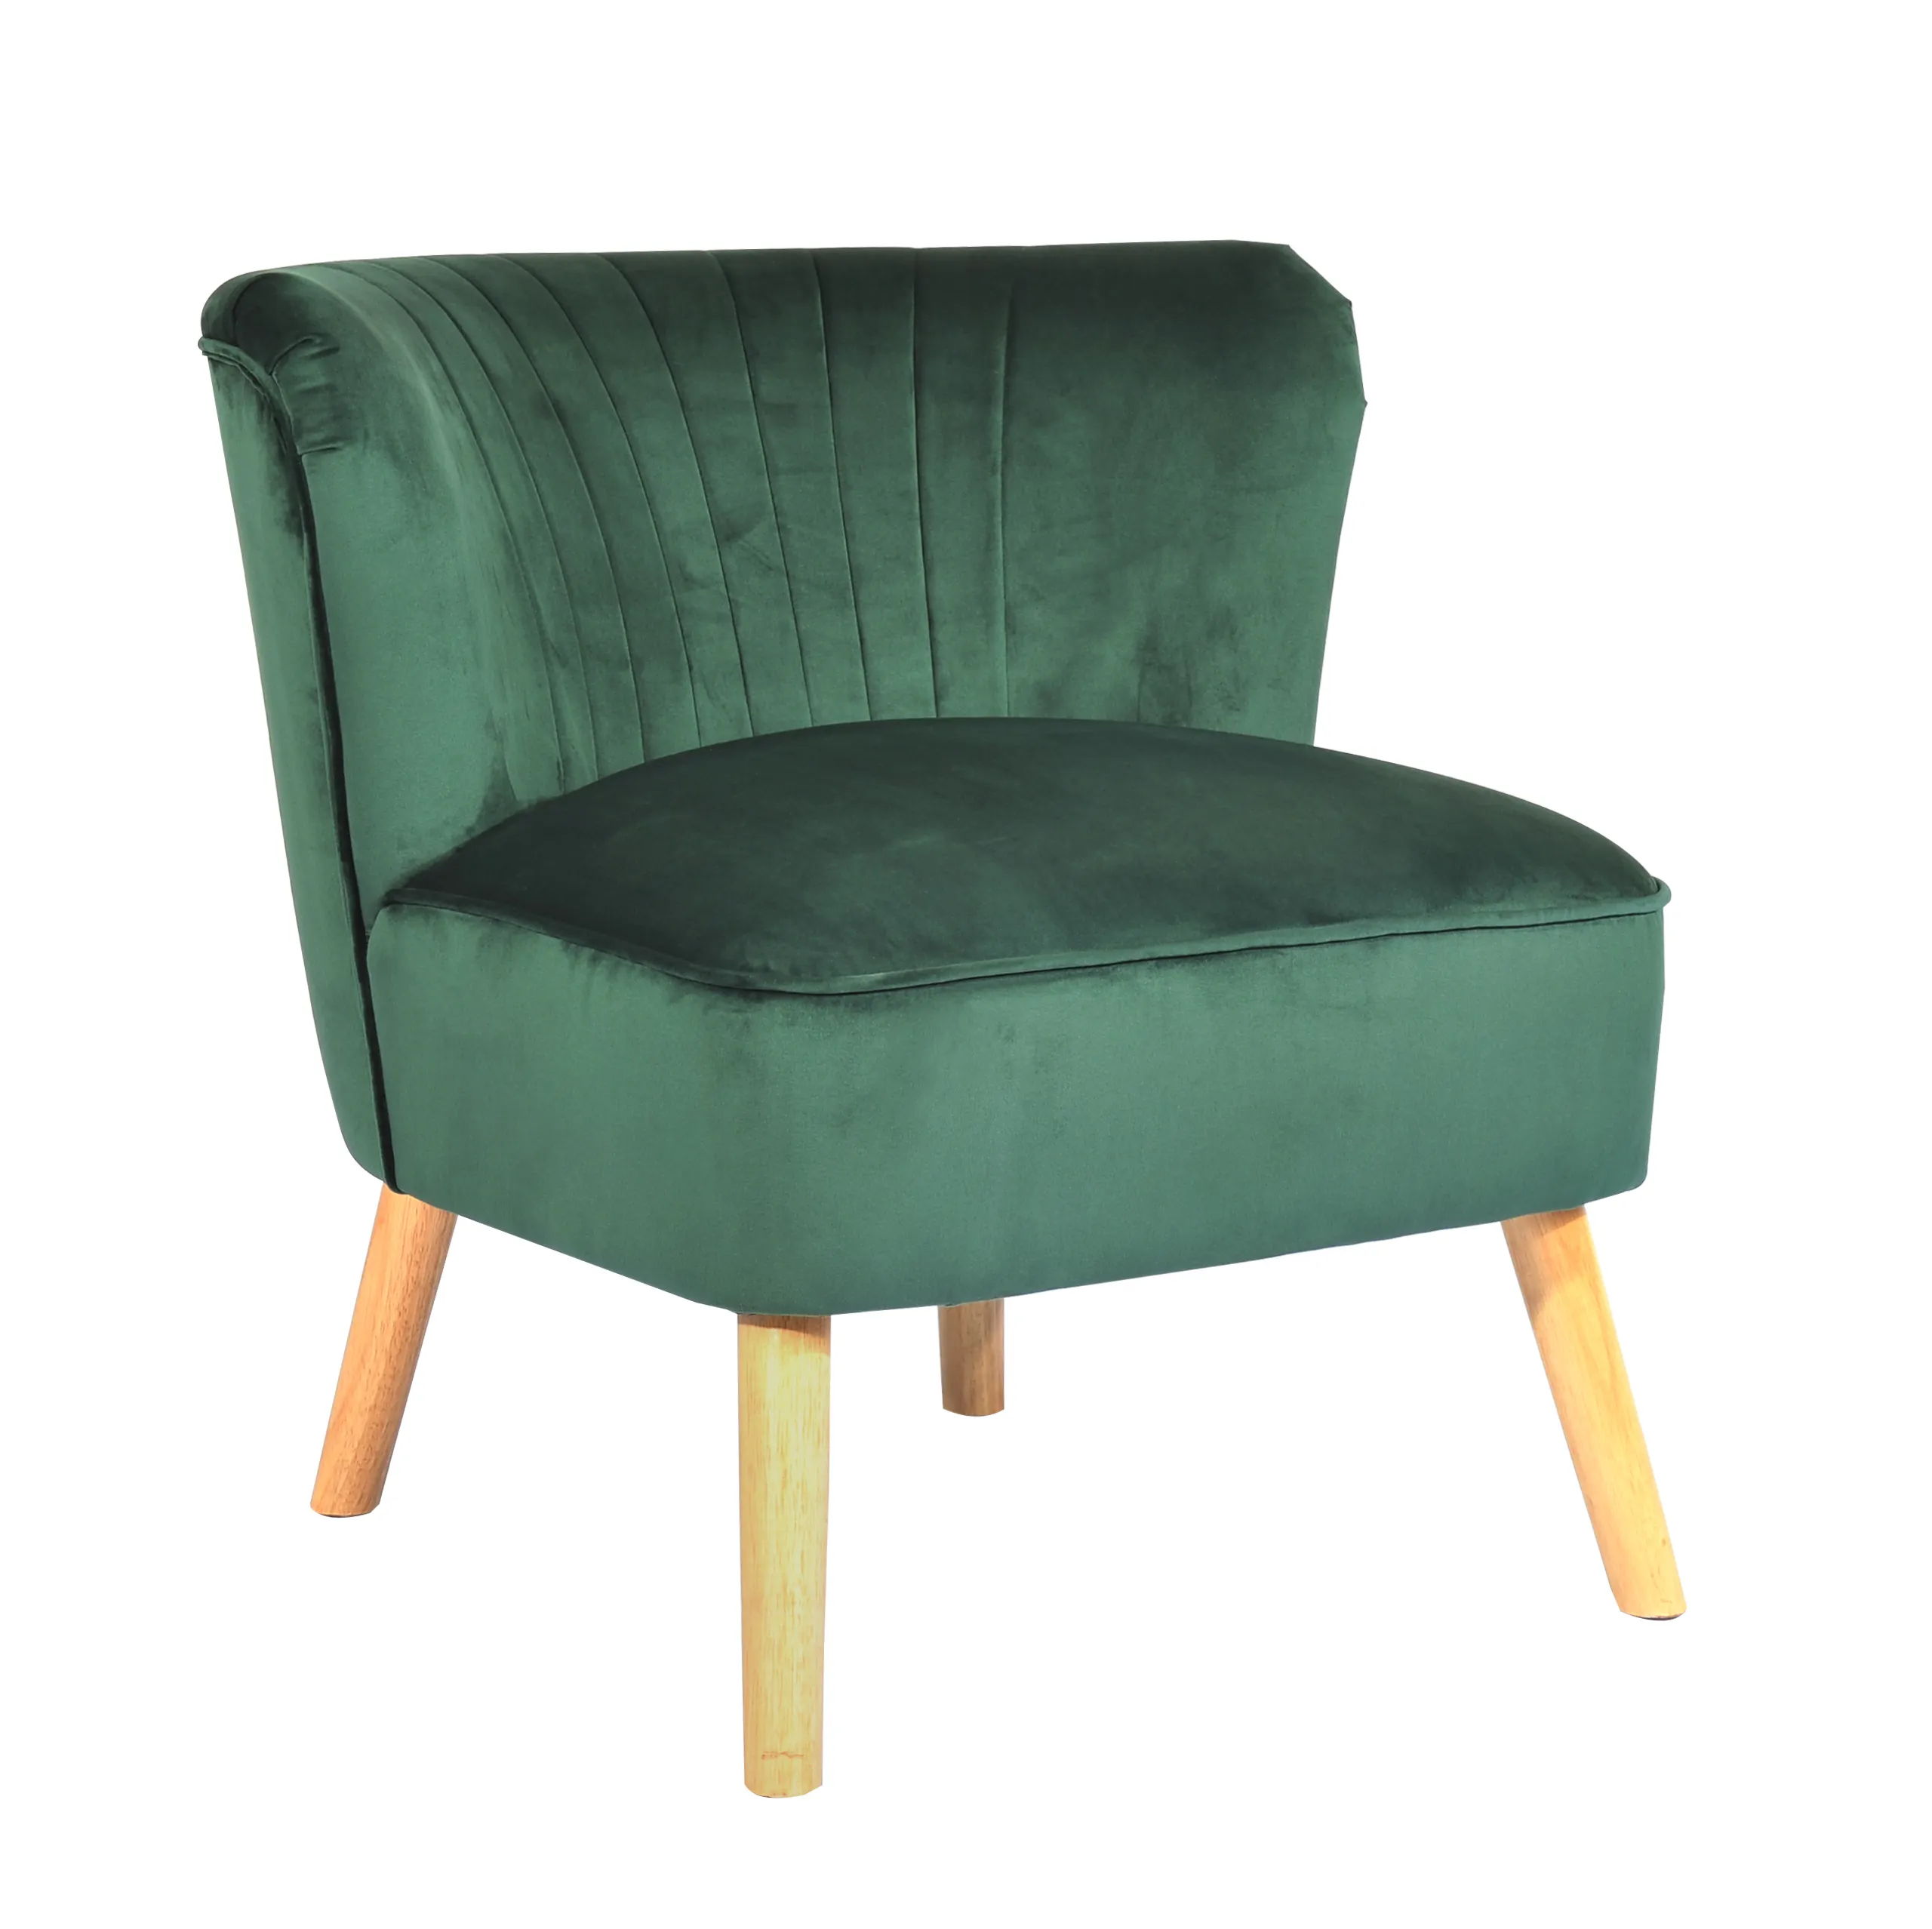 Soft Comfortable Wooden Leg Velvet Fabric Accent Chairs Green Accent Chair